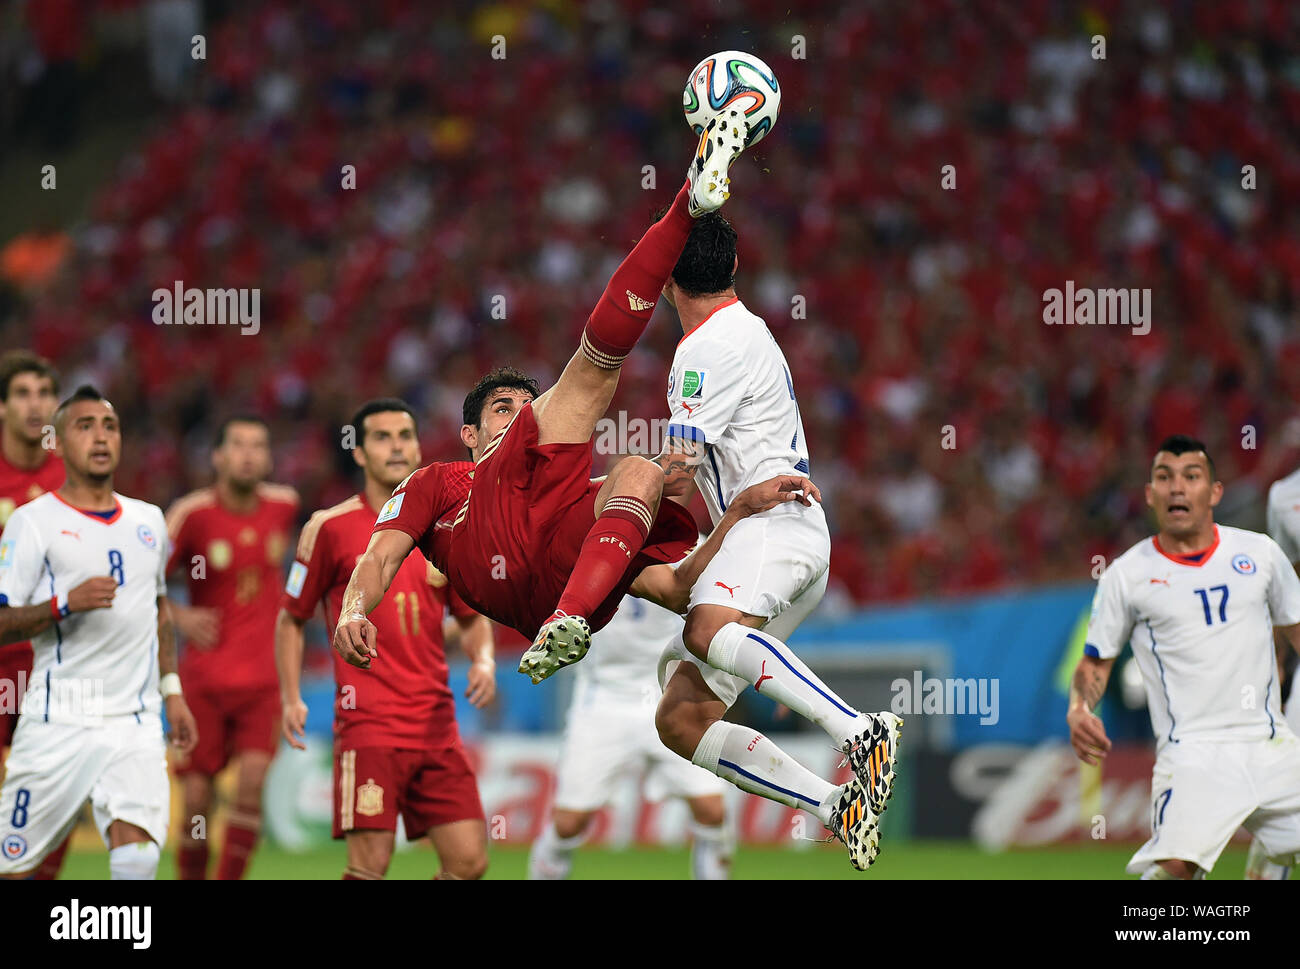 Rio de Janeiro, June 18, 2014. Soccer player Diego Costa hits a bike during the match, Spain vs Chile, for the 2014 World Cup at the Maracanã Stadium Stock Photo